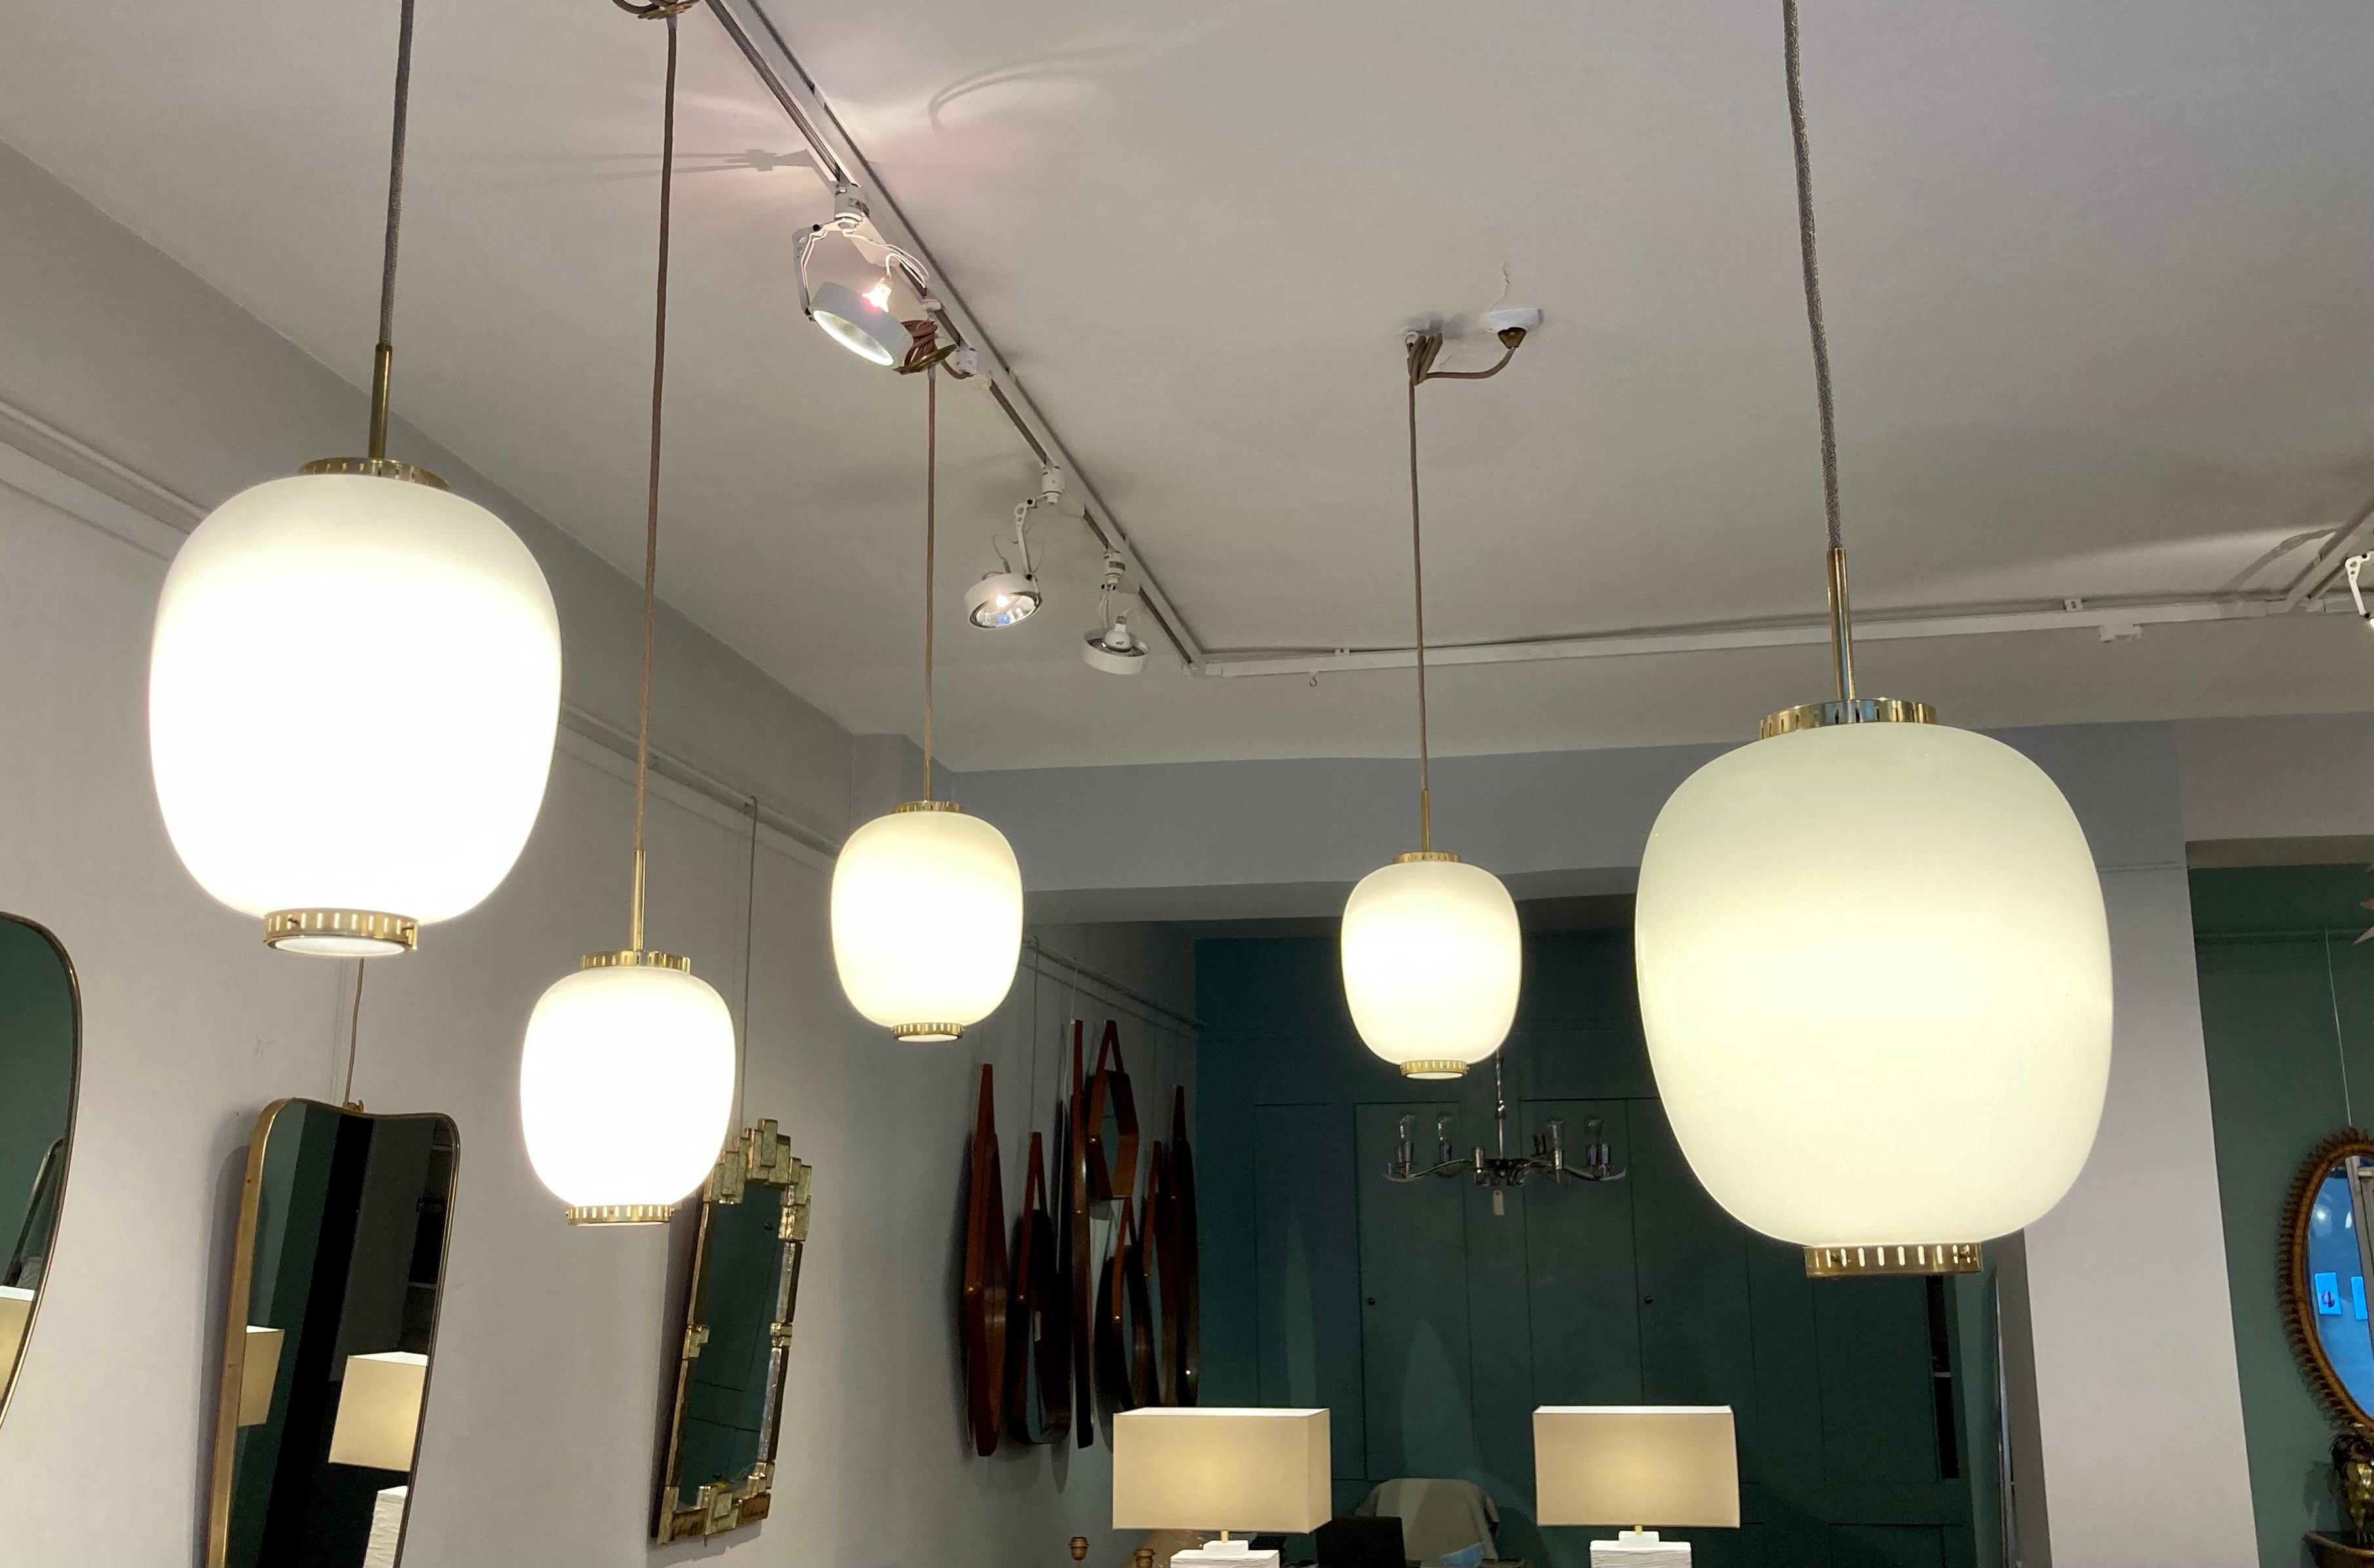 Collection of 8 opaline glass and brass ceiling fixtures.
See dimensions below
Designed by Bent Karlby for Lyfa.
Denmark, late 1950s.

Dimensions: (Height of the opaline + top and bottom brass discs )
Medium (3 items available) H 11.8 in. (30